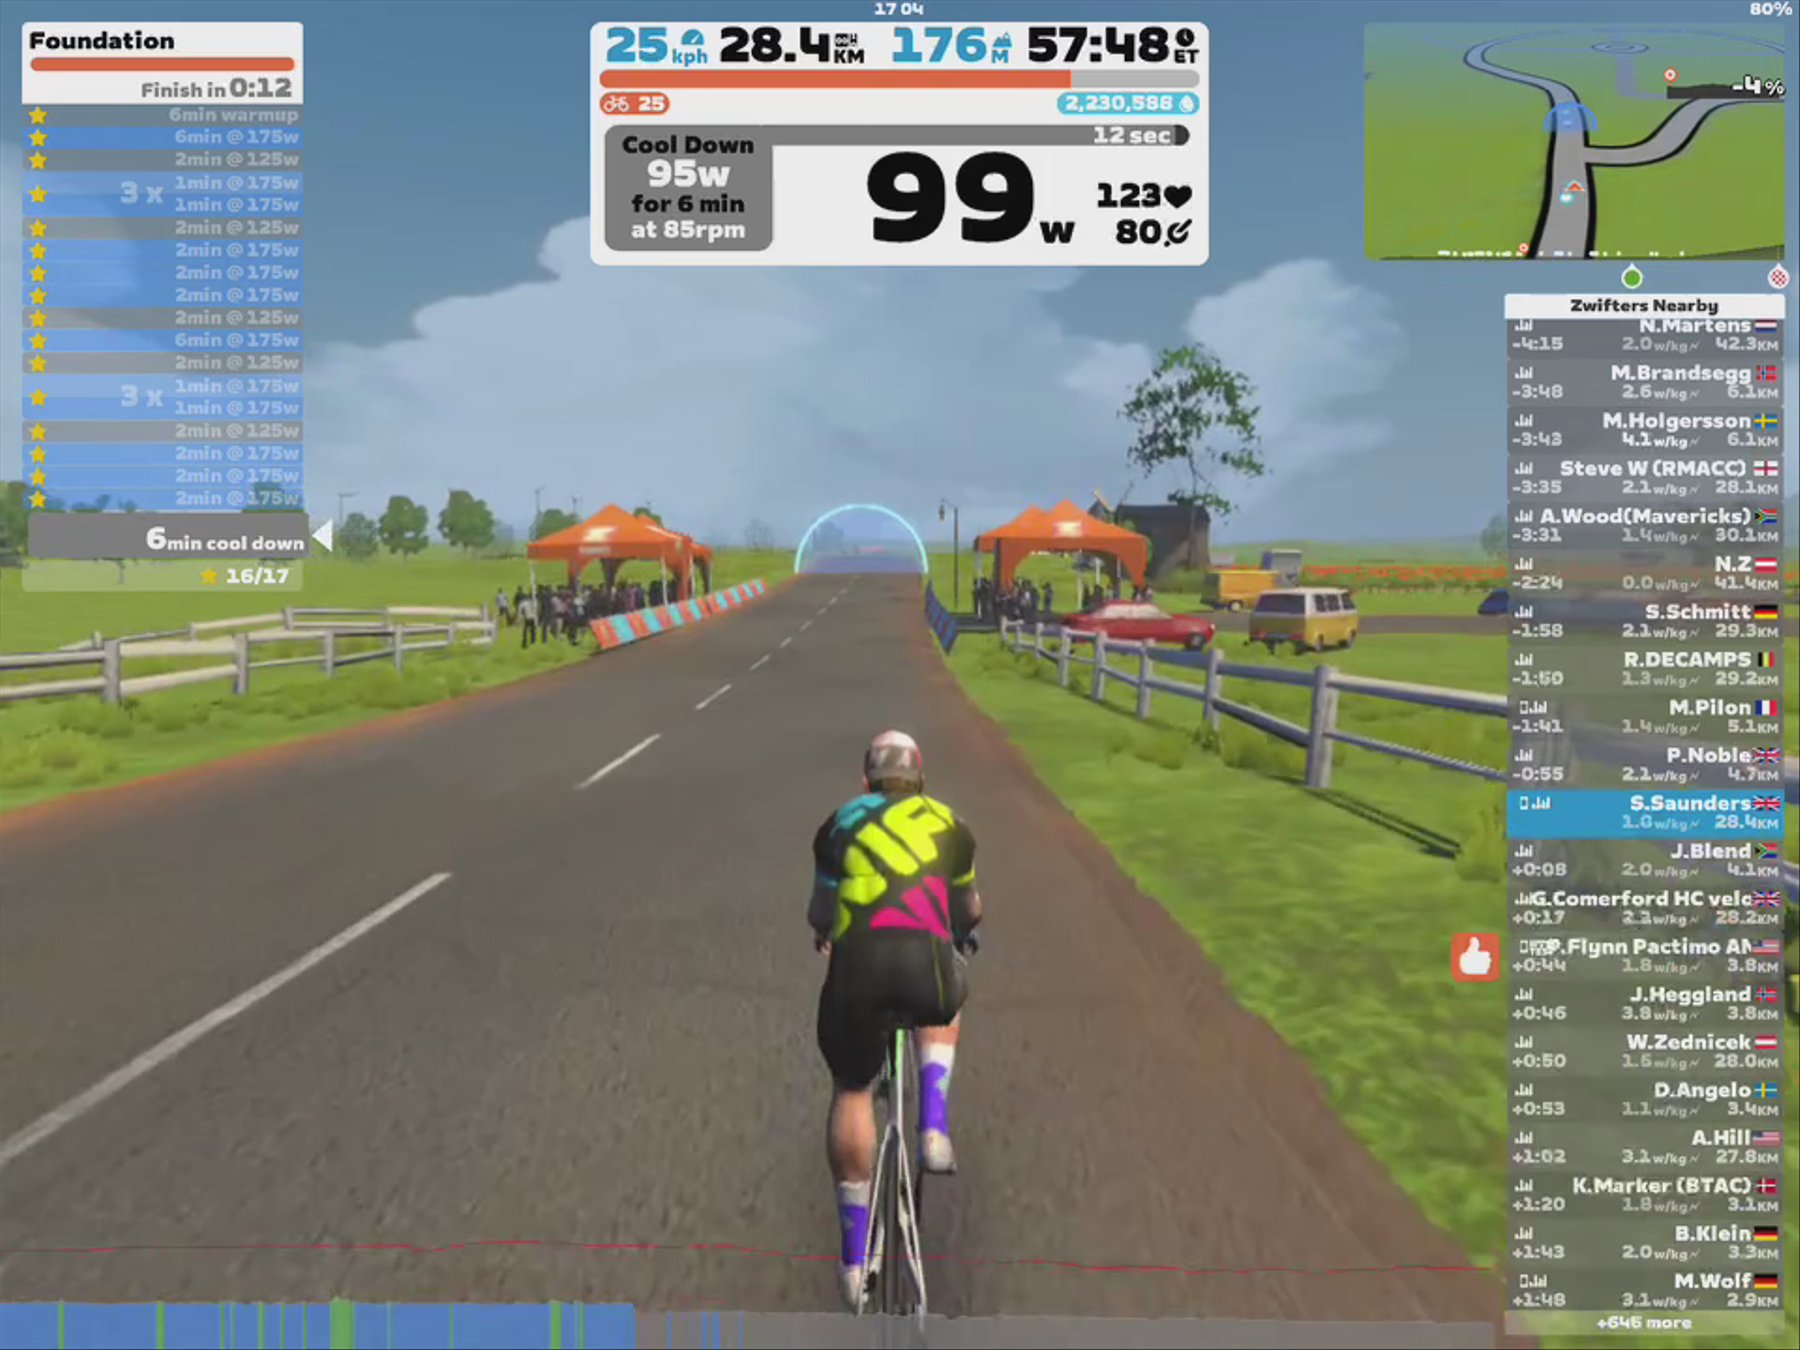 Zwift - Foundation in France